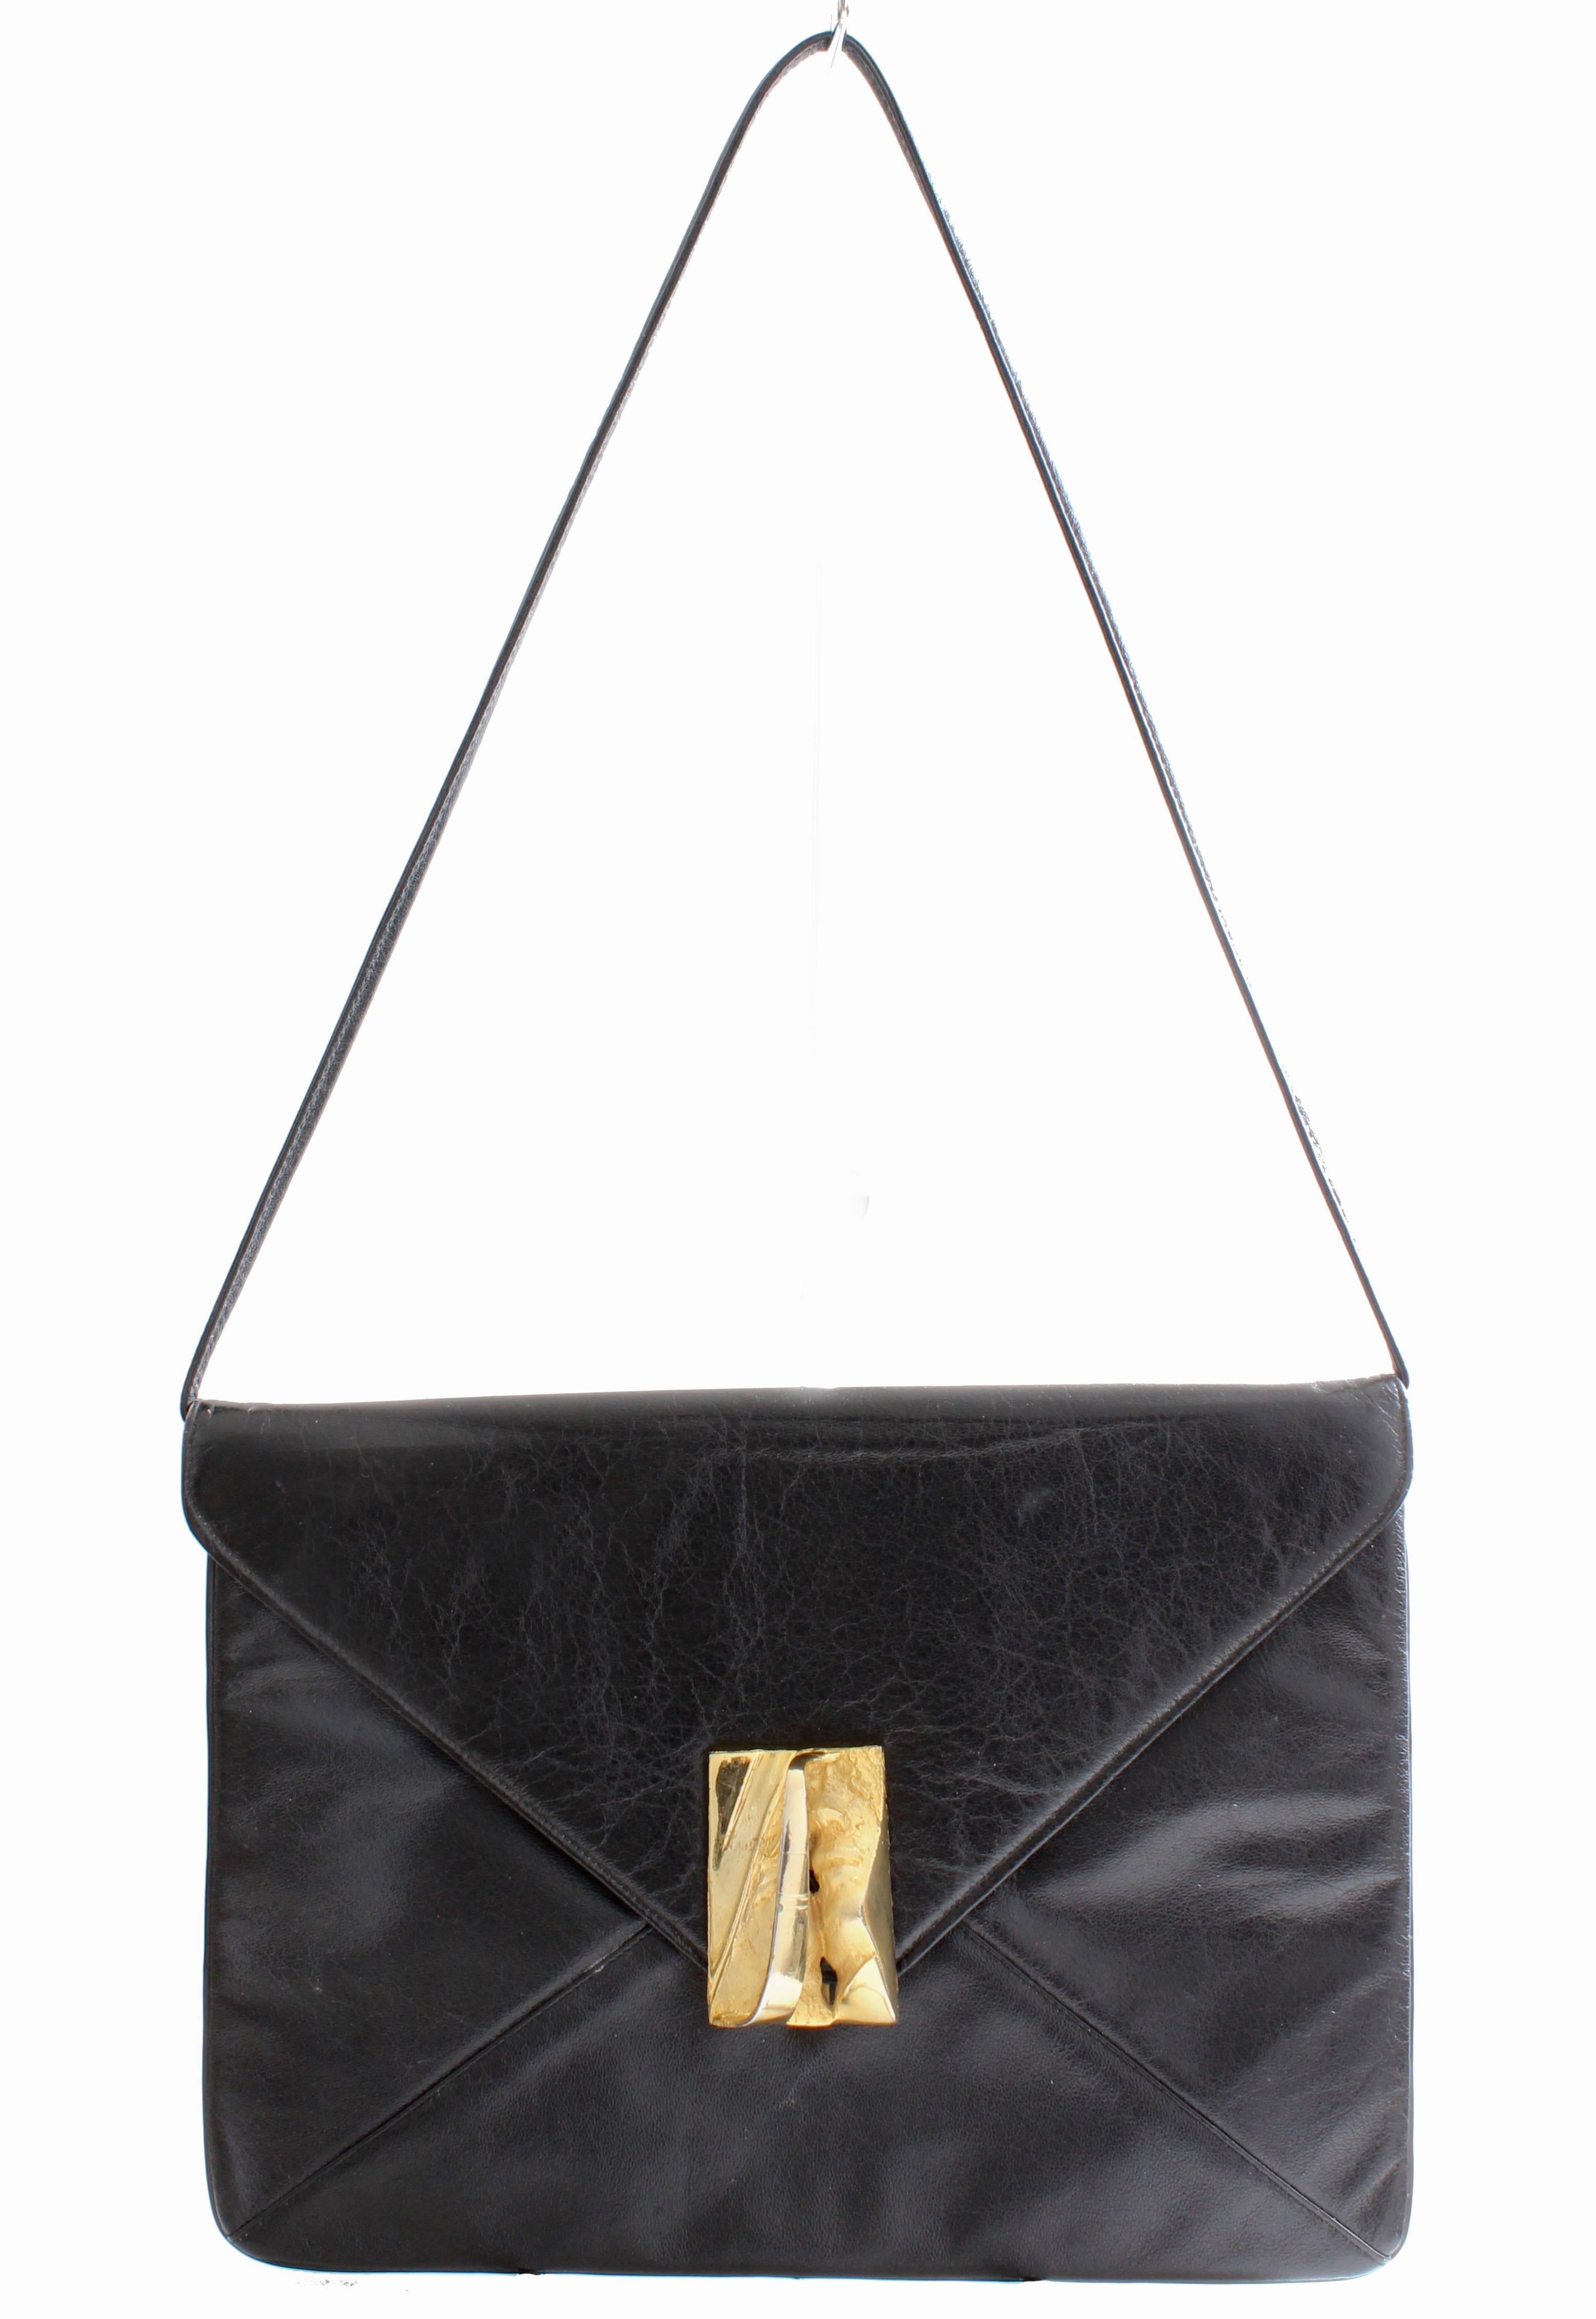 Rosenfeld Black Leather Envelope Clutch/Shoulder Bag with Abstract Clasp, 1960s In Good Condition In Port Saint Lucie, FL